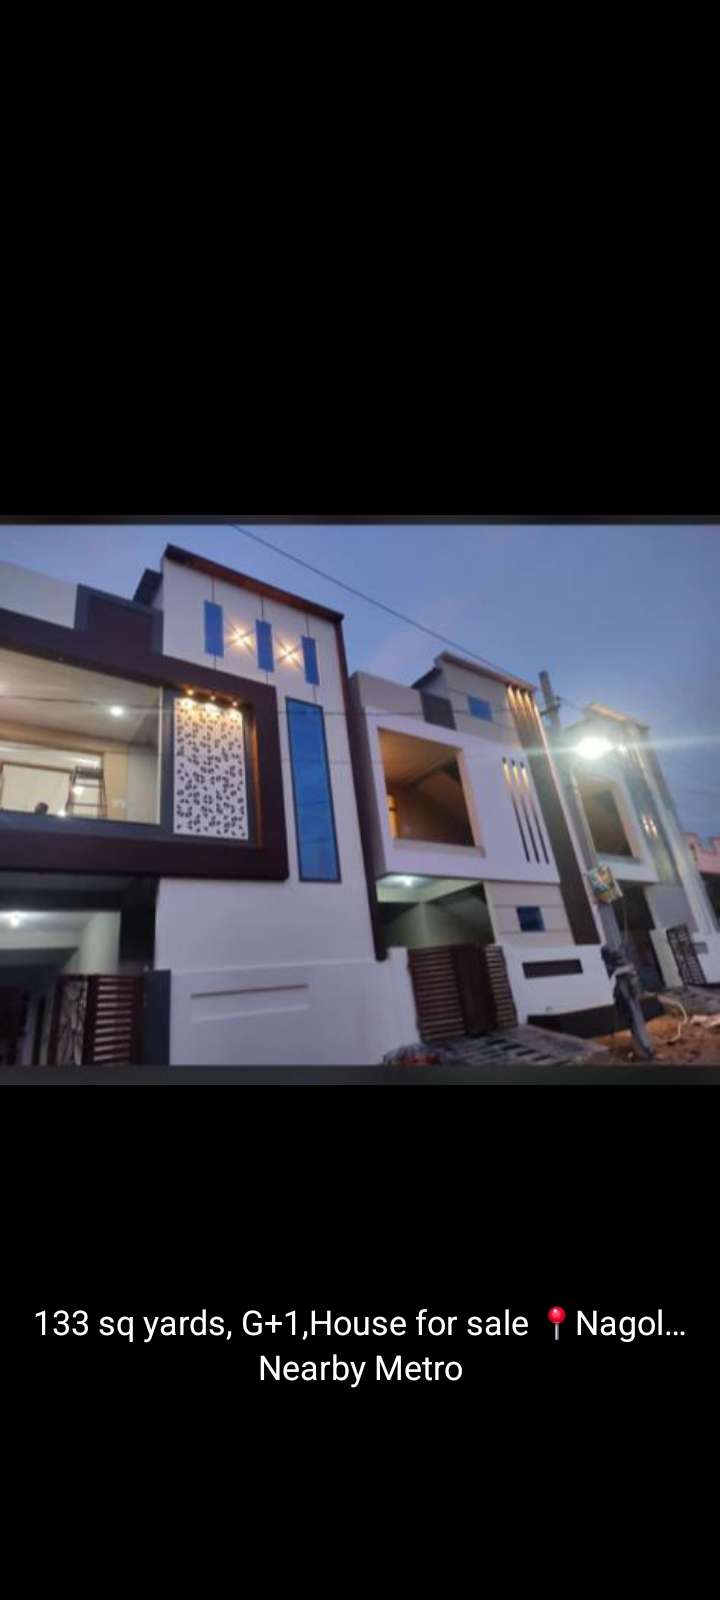 4 Bedroom 133 Sq.Yd. Independent House in Nagole Hyderabad